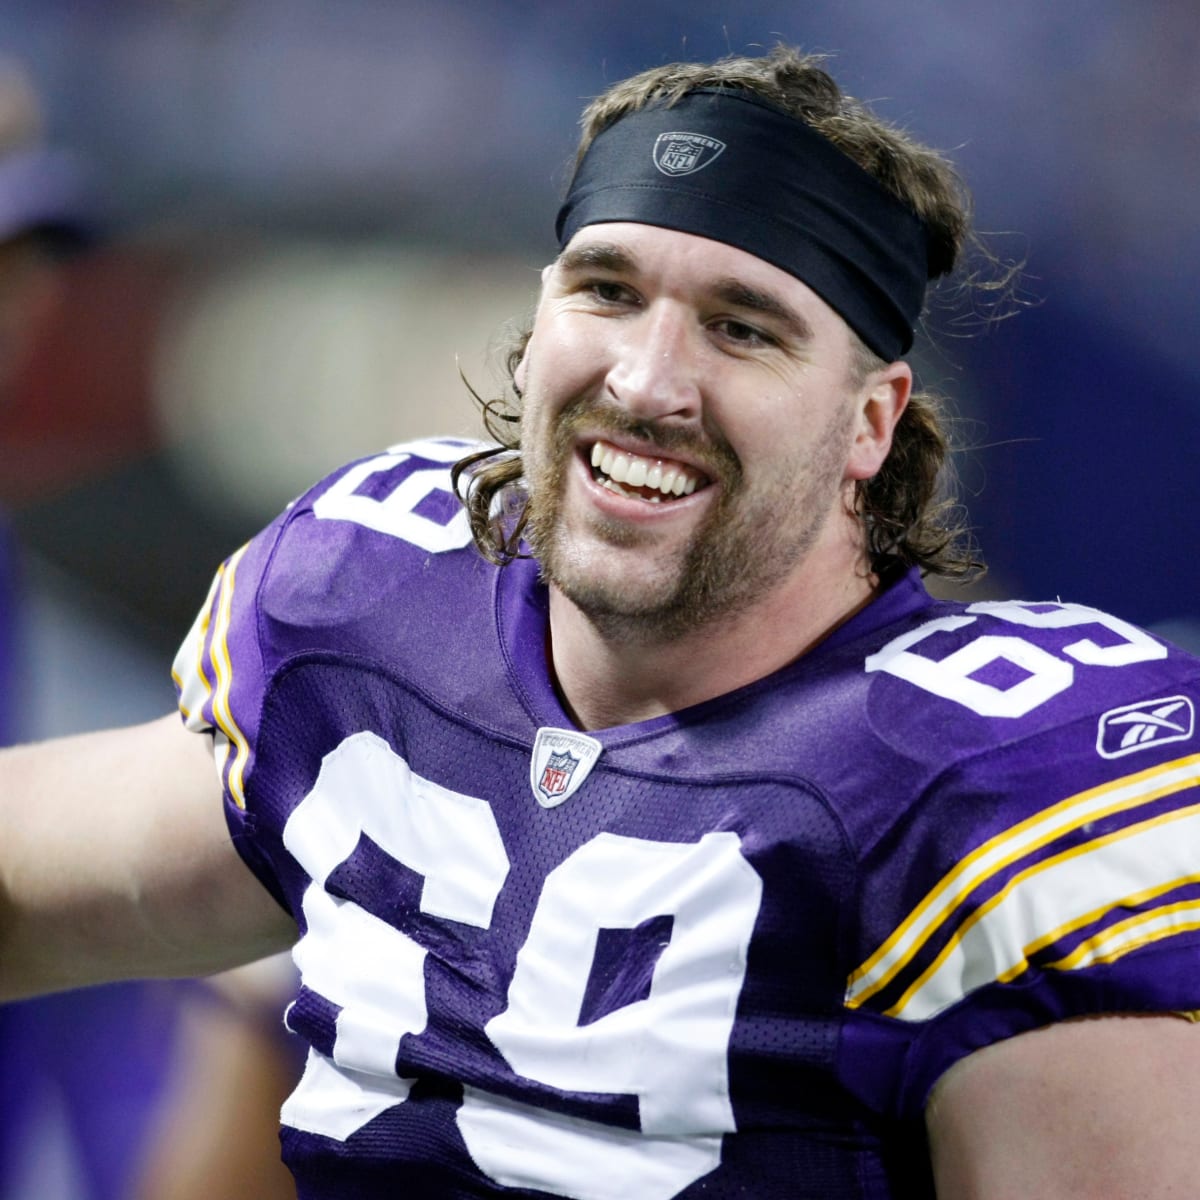 Jared Allen officially inducted as 27th member of Vikings Ring of